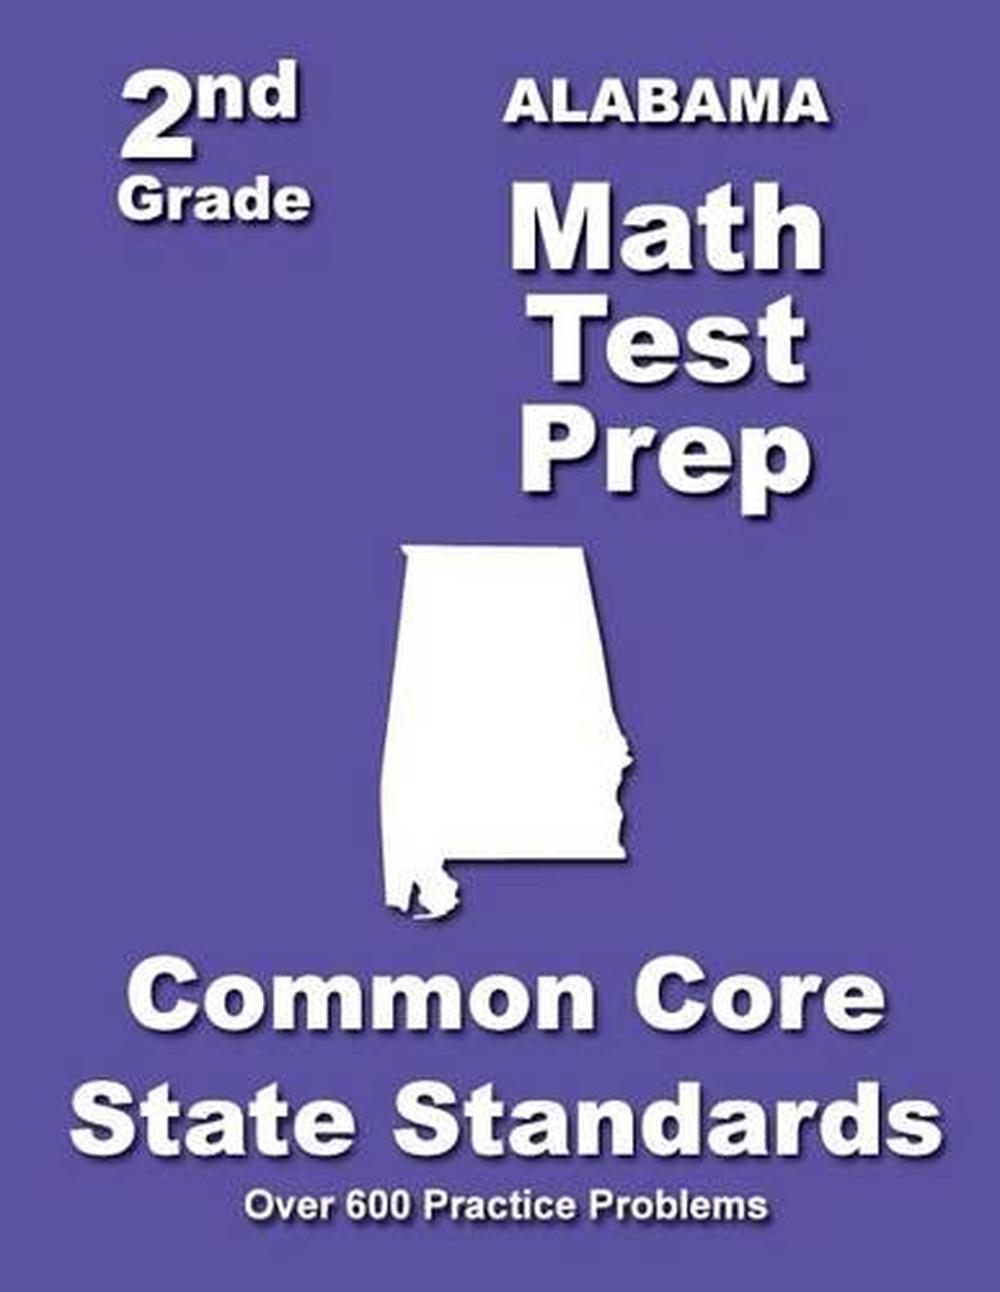 Alabama 2nd Grade Math Test Prep Common Core State Standards by